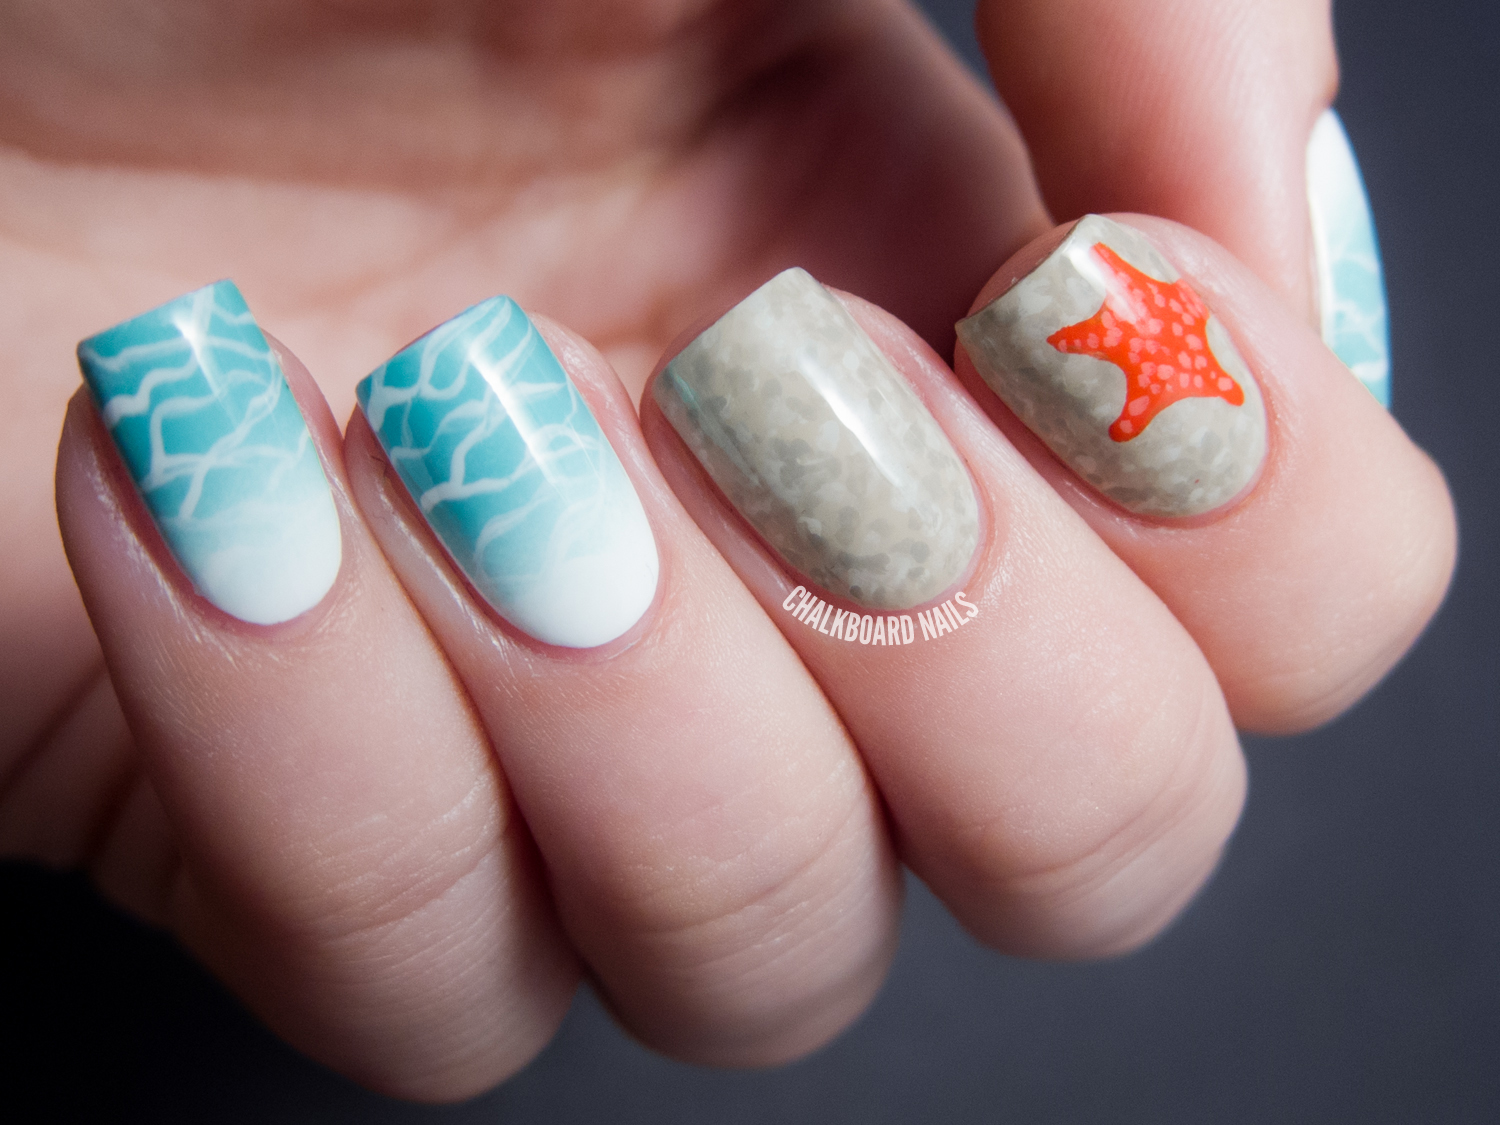 10. "Easy Summer Nail Designs with Step-by-Step Tutorials" - wide 4